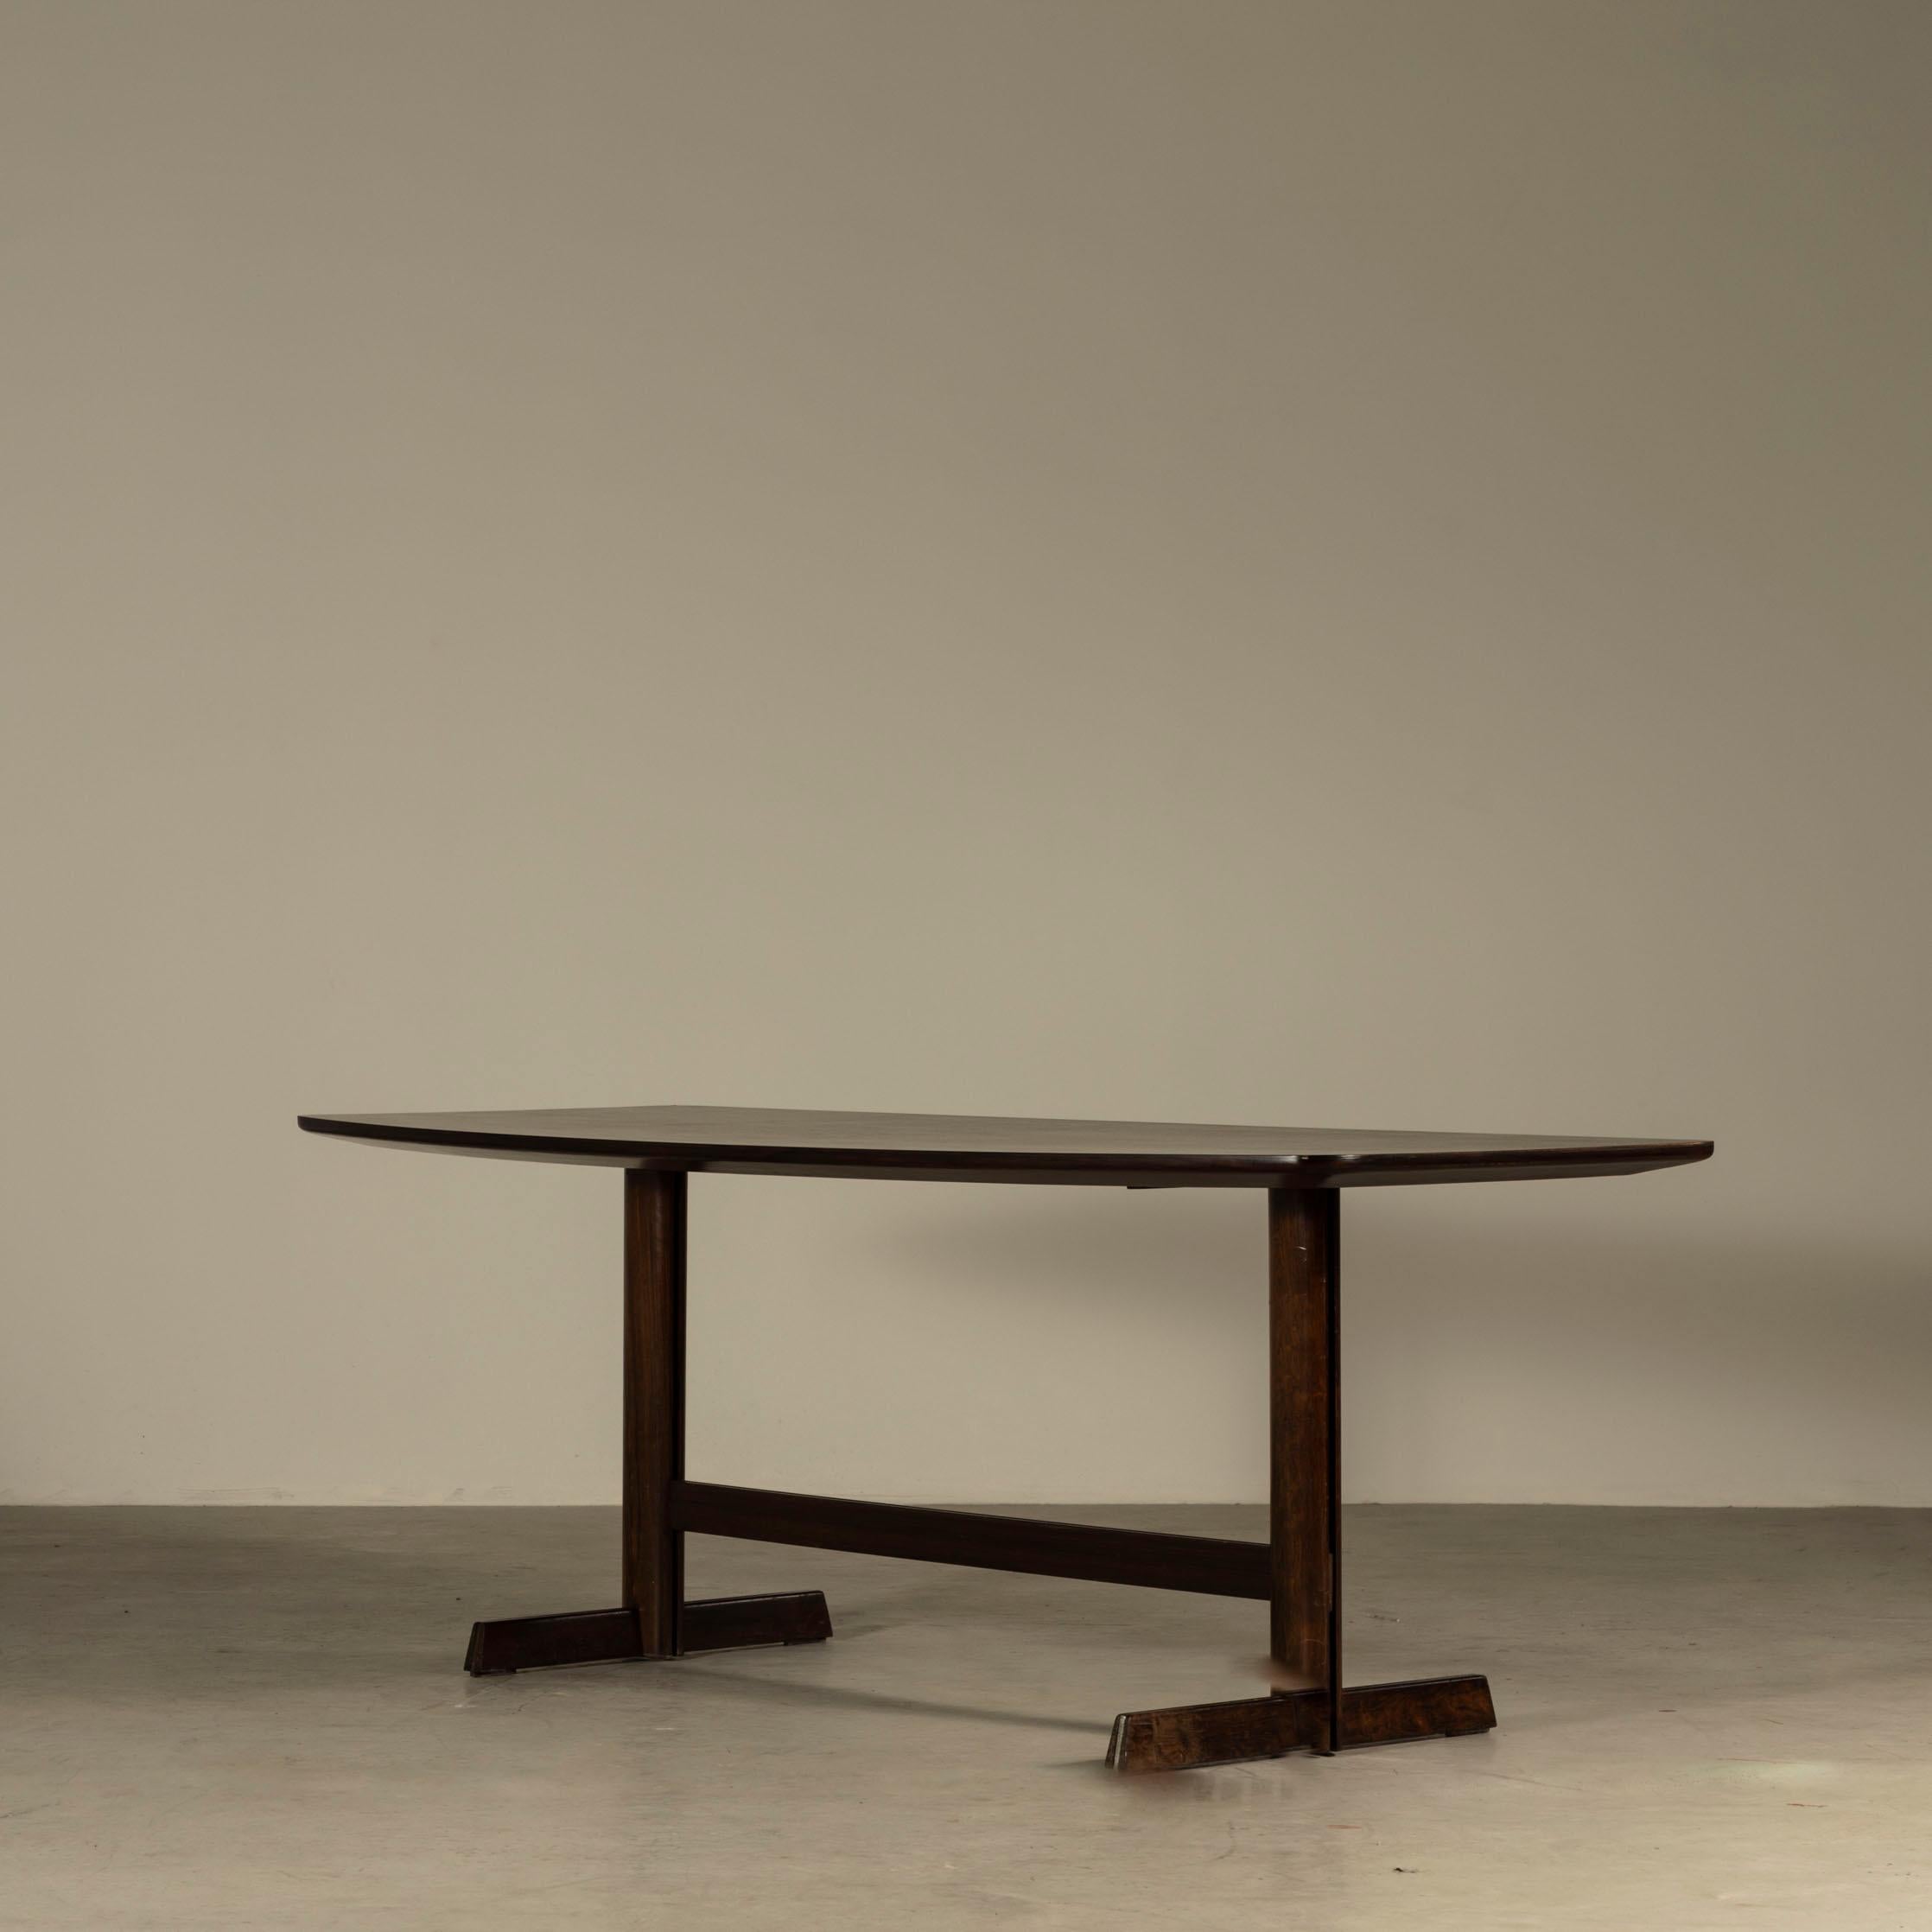 Rare Dining Table in Hardwood, by L'atelier, Brazilian Mid-Century Modern In Good Condition For Sale In Sao Paulo, SP